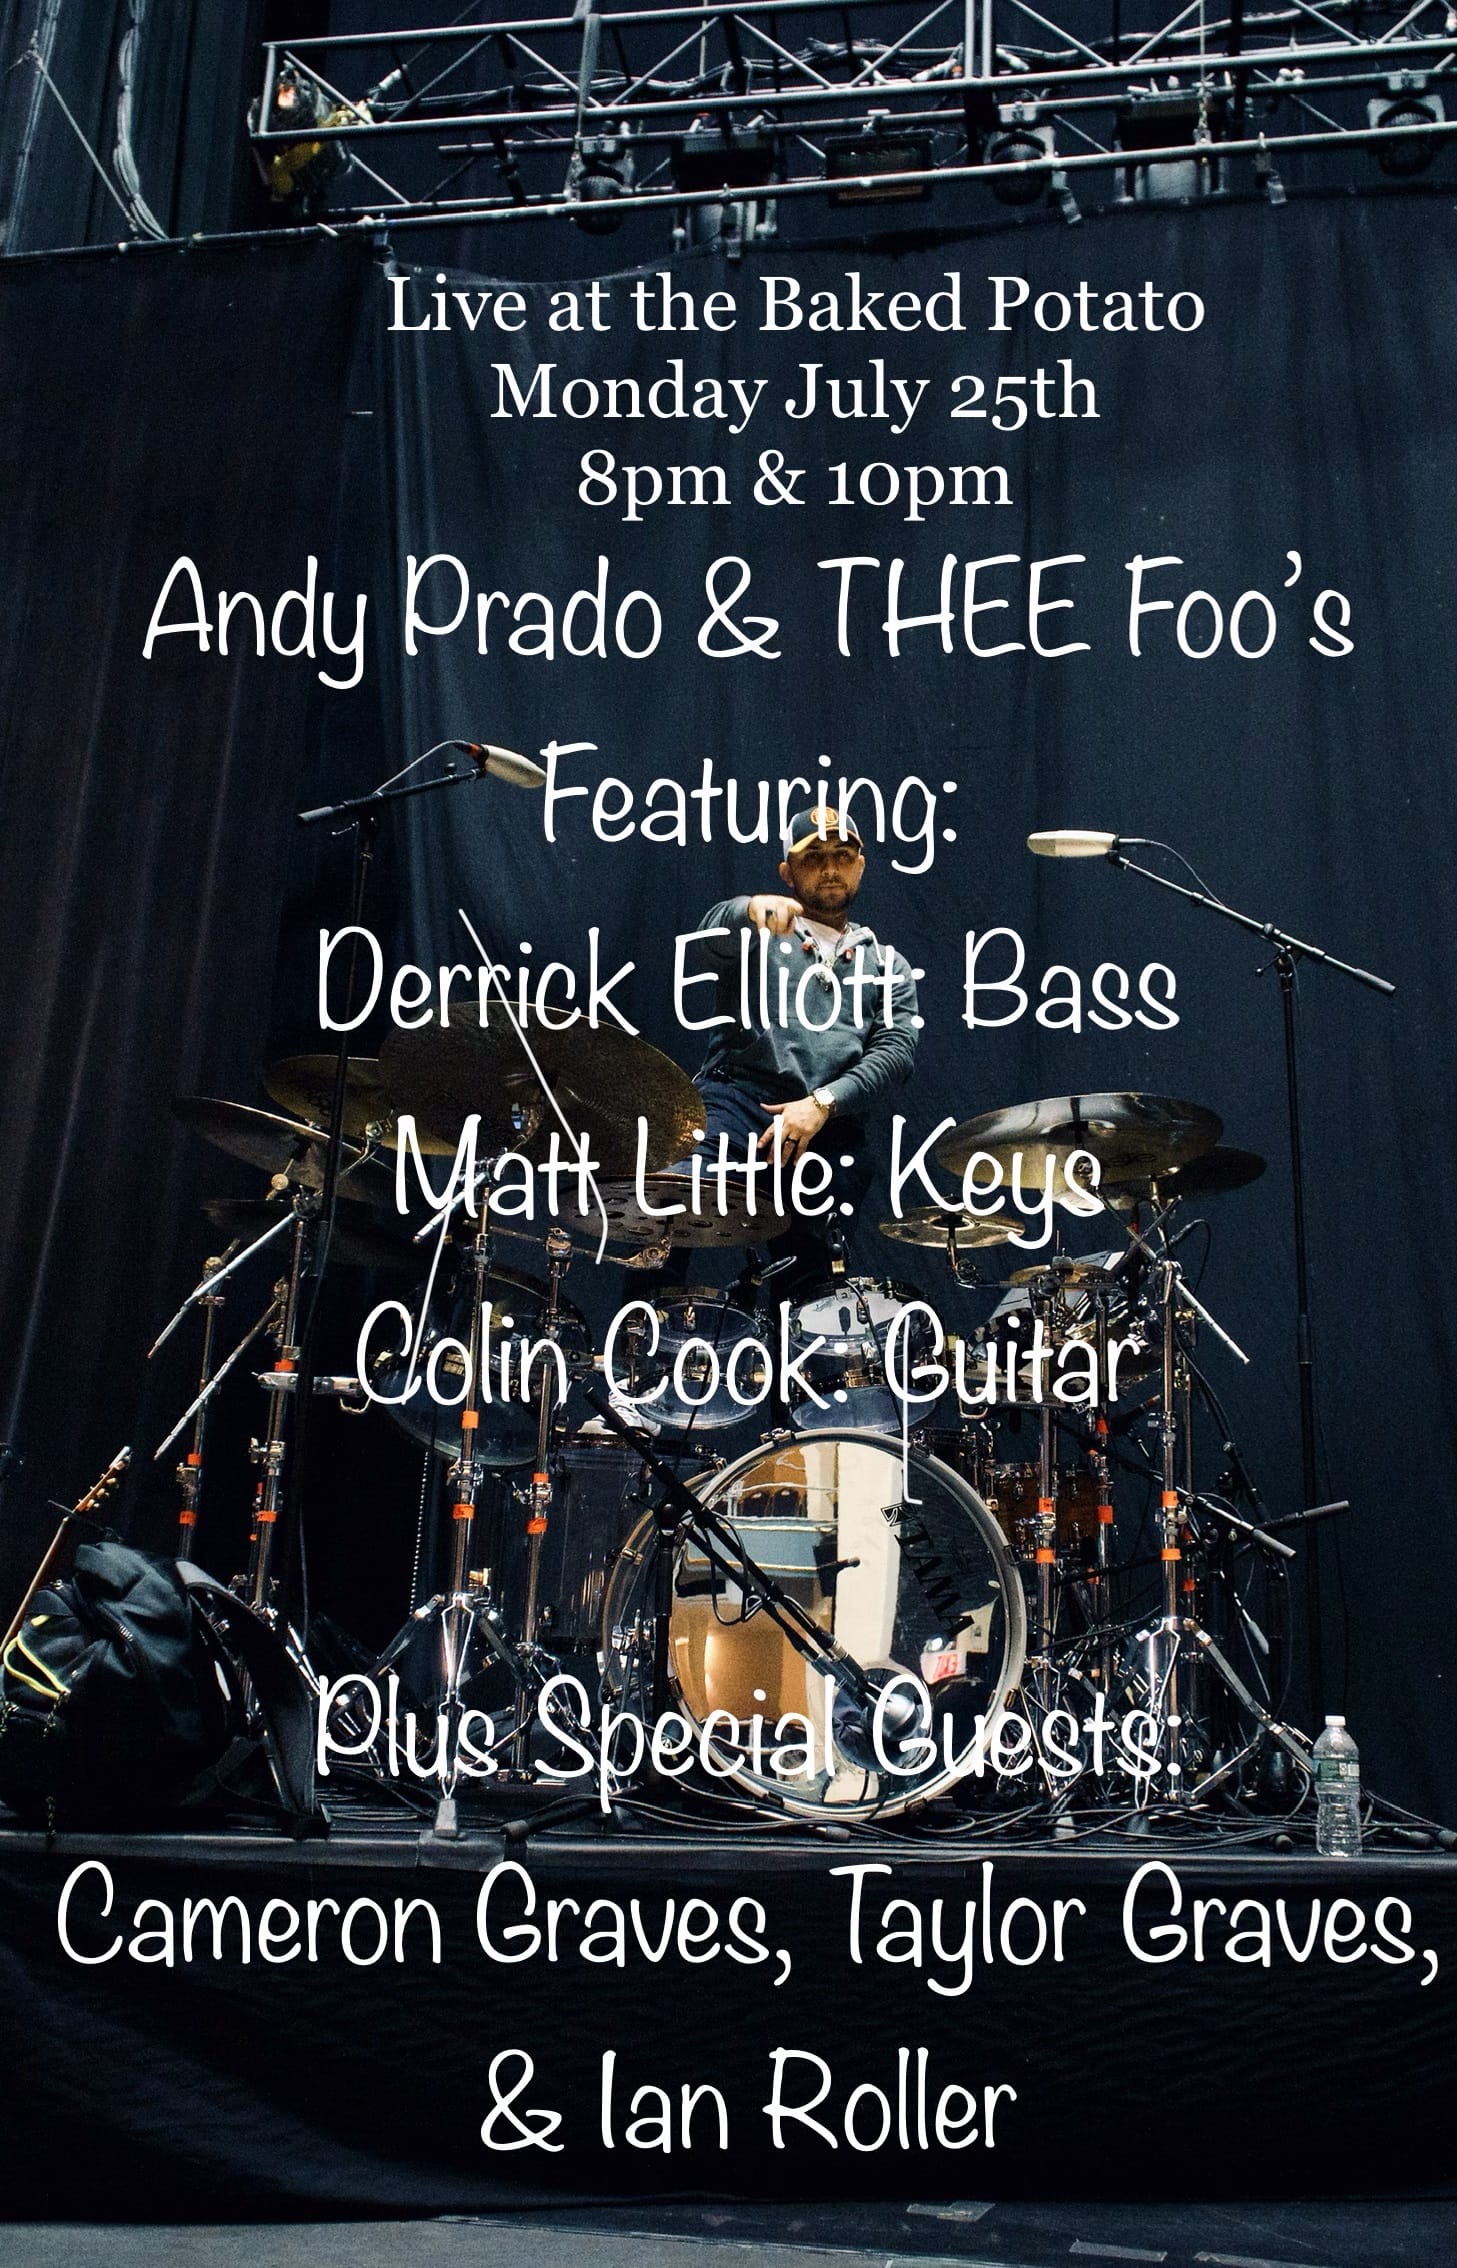 ANDY PRADO and THEE Foo's - Monday, July 25, 2022